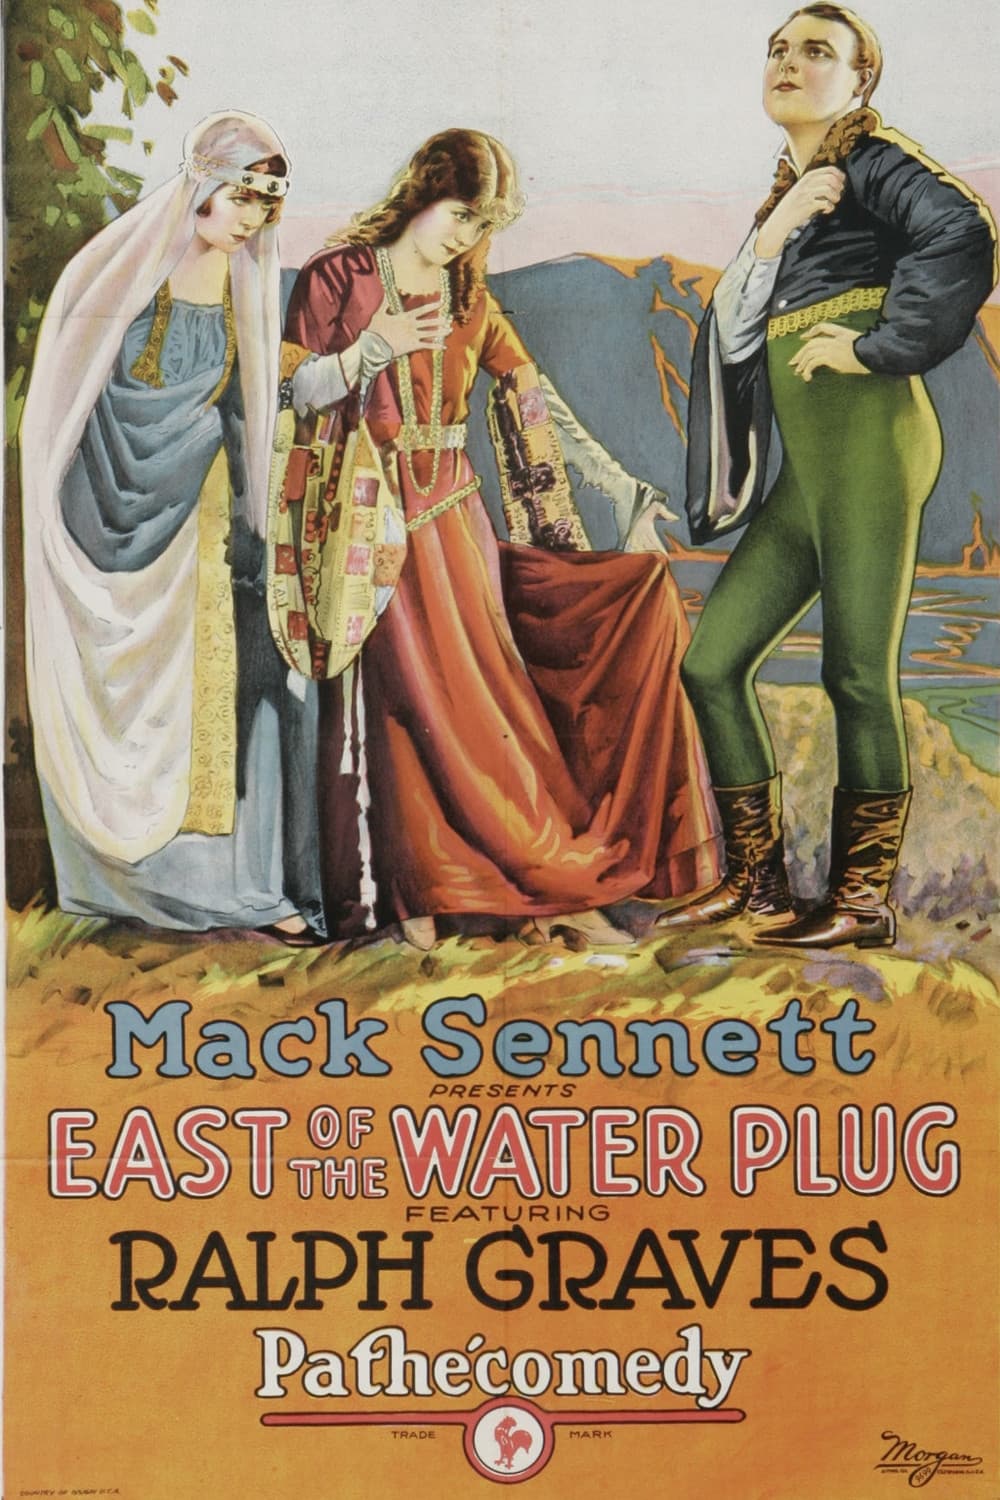 East of the Water Plug